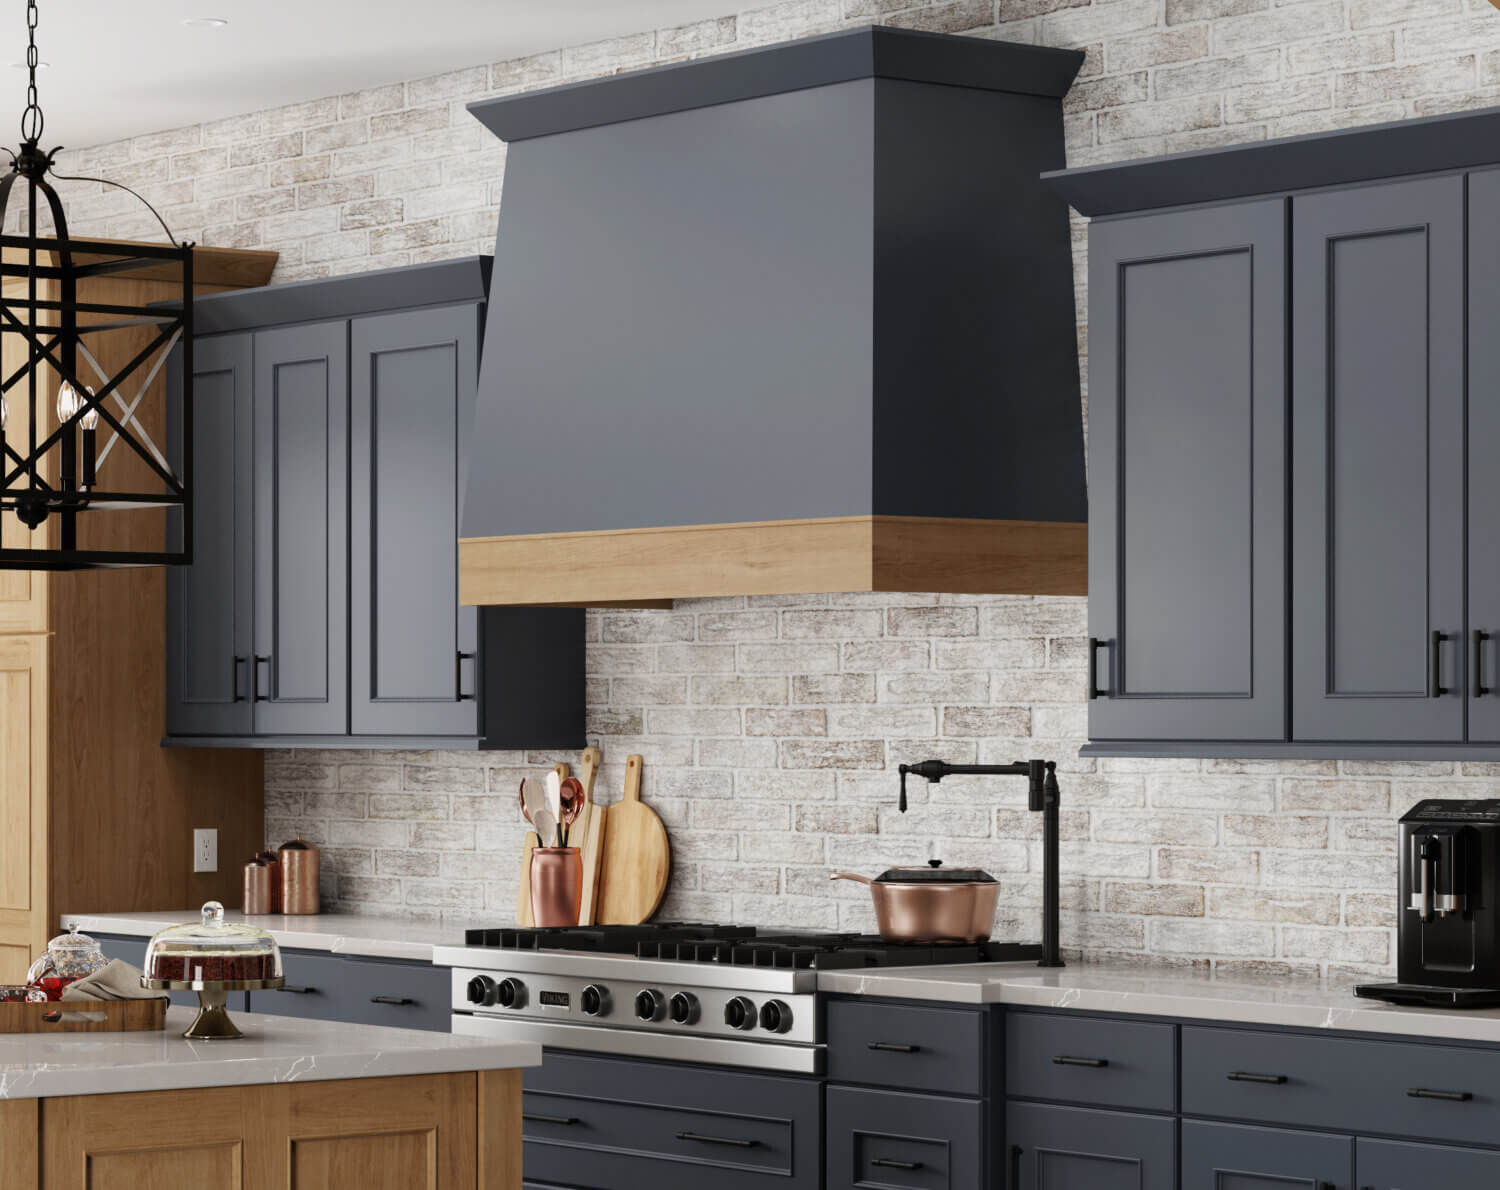 A close up of the two-toned wood hood and kitchen cabinets in a dark navy blue paint and light stained cherry wood.